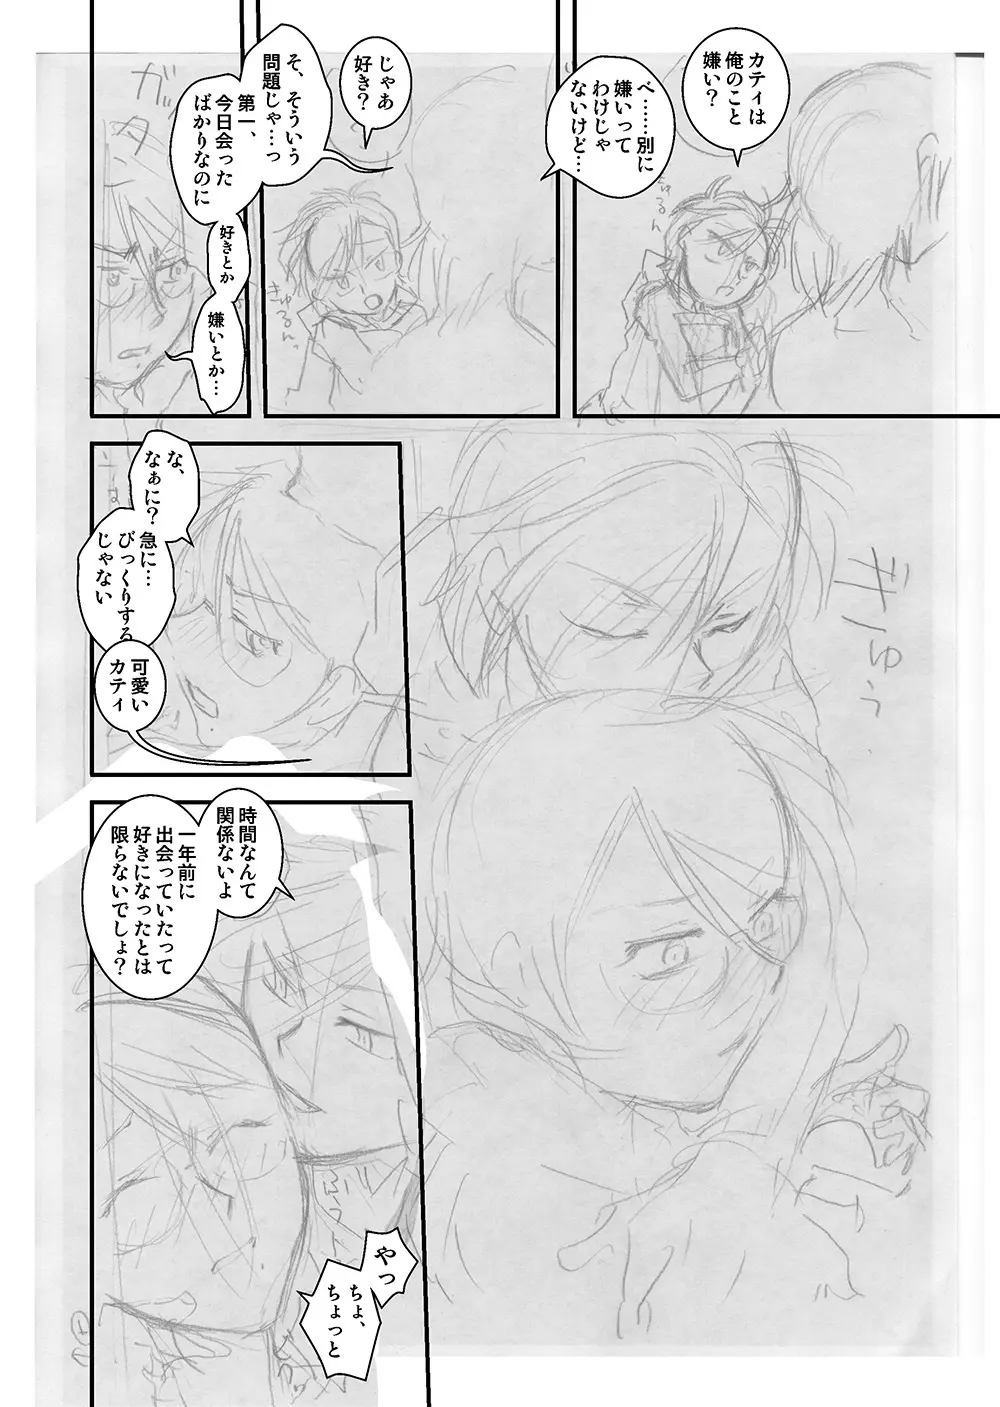 ［WEB再録（？）］たいさとおれ。 - page7